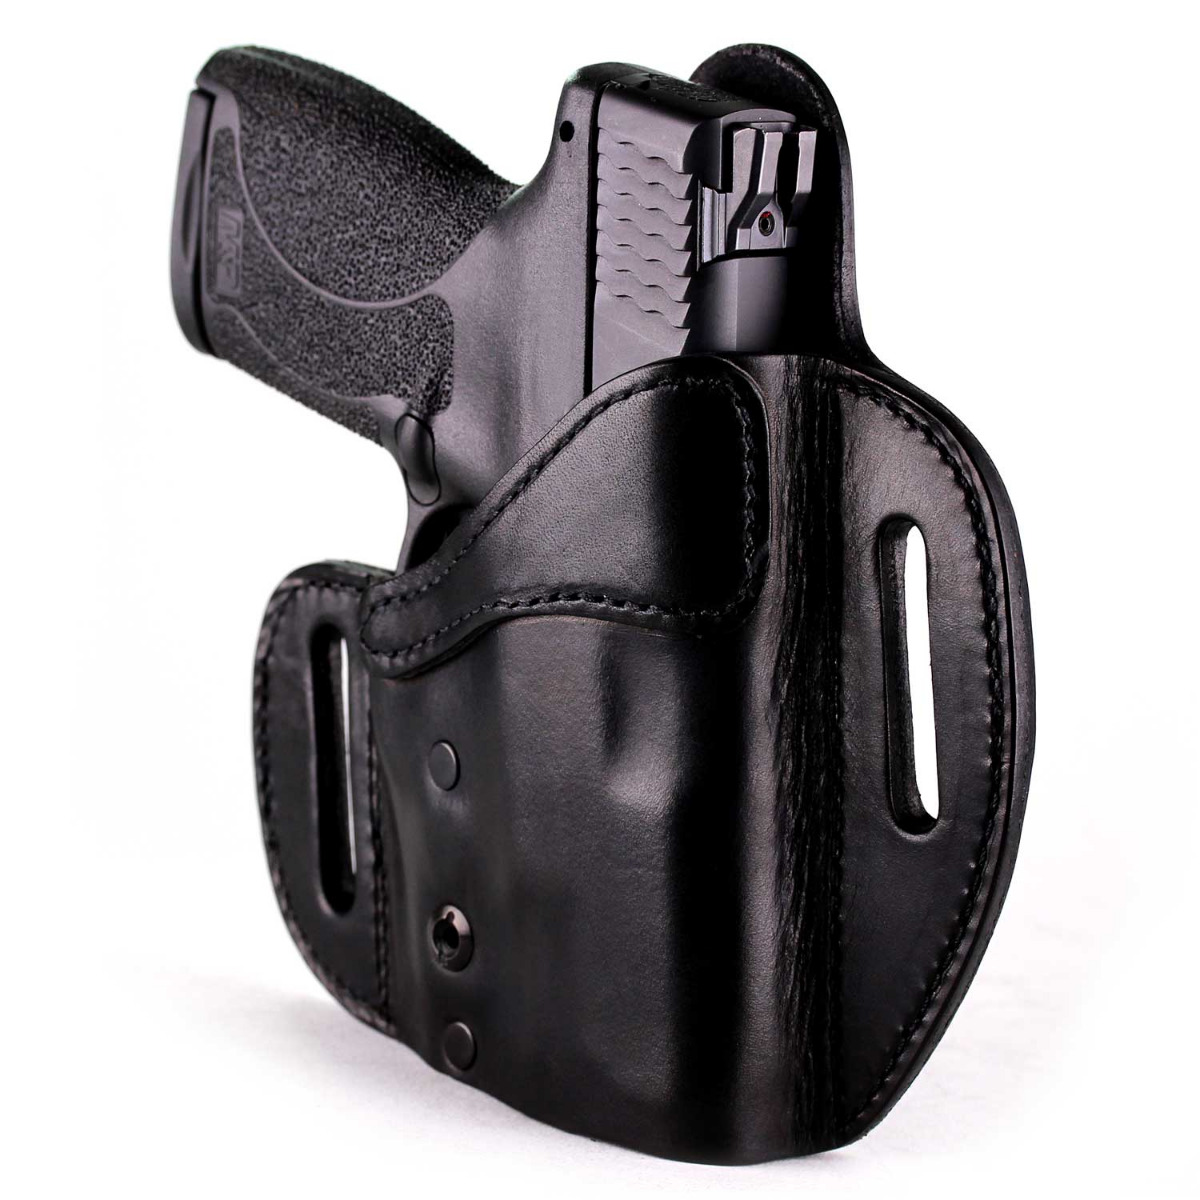 4 IN 1 IWB & OWB LEATHER HOLSTER MULTI-CARRY HOLSTER FOR WALTHER P22 